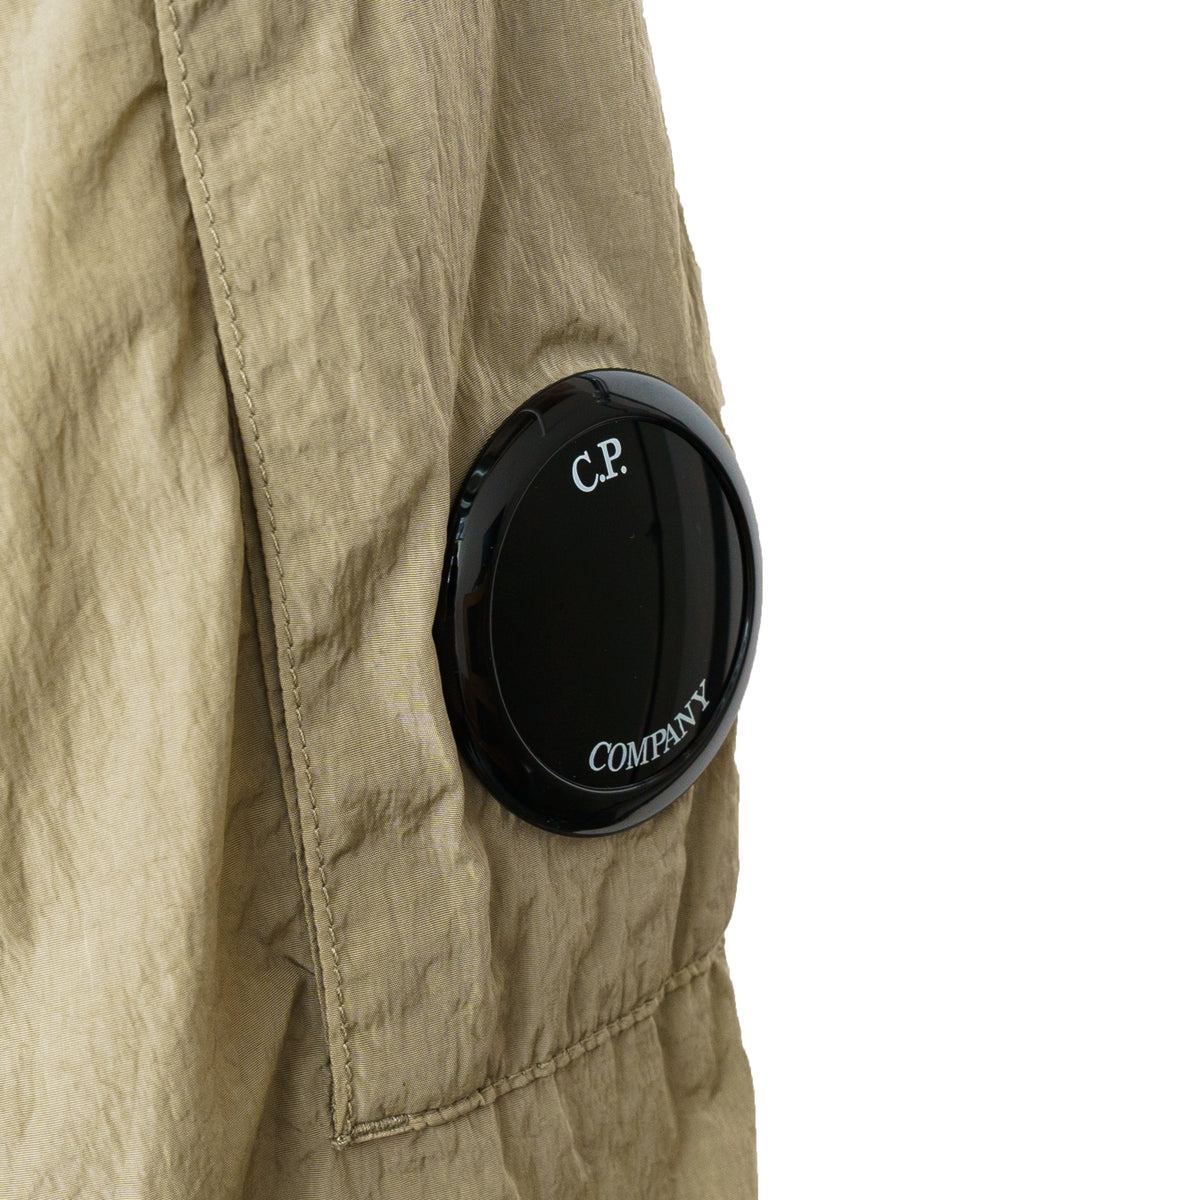 Load image into Gallery viewer, C.P. Company Silver Sage Chrome-R Overshirt
